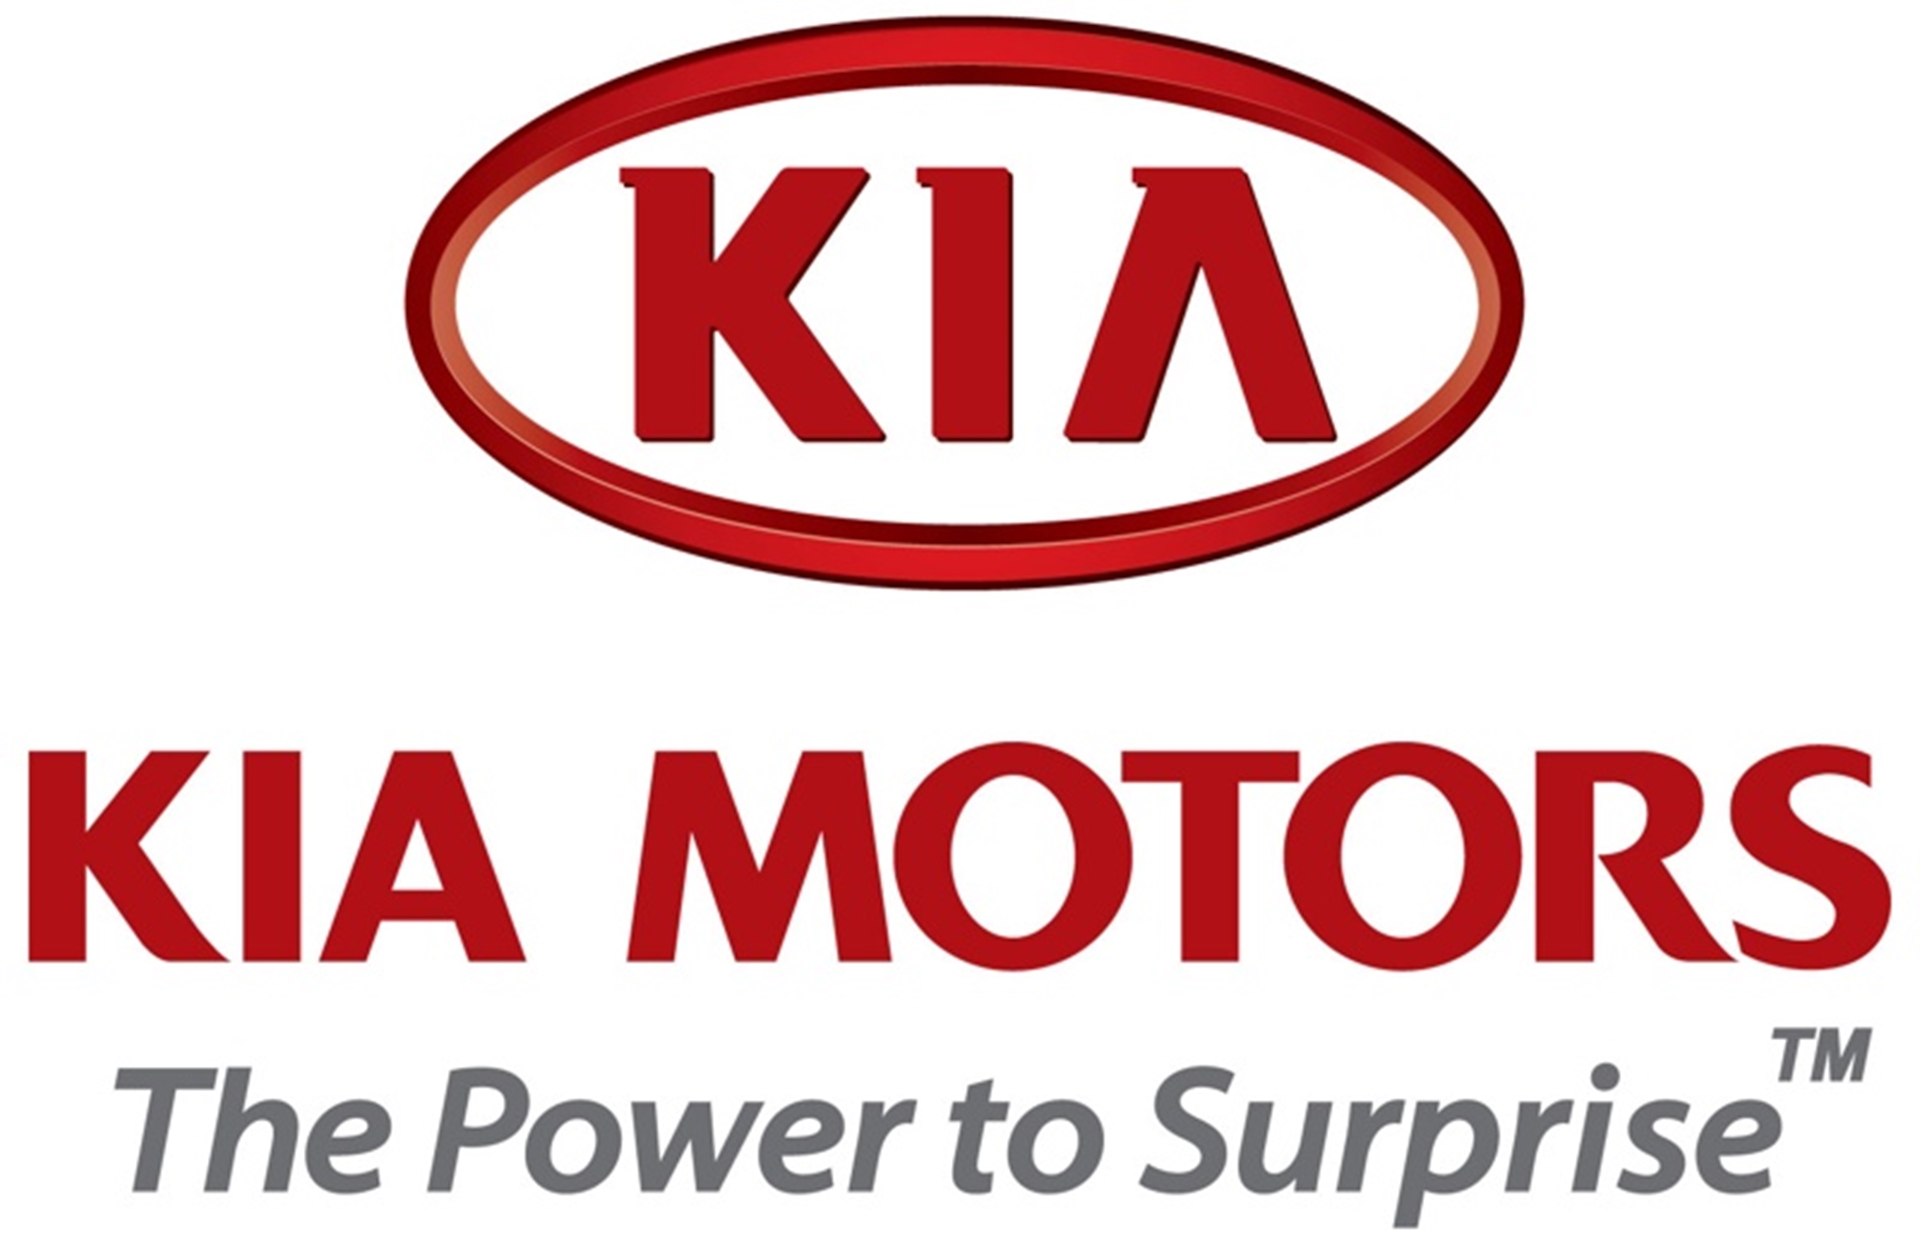 KIA MOTORS SOUTH AFRICA: THE OFFICIAL VEHICLE SPONSOR TO THE 2012 SUPER 8 LAST MAN STANDING BOXING TOURNAMENT